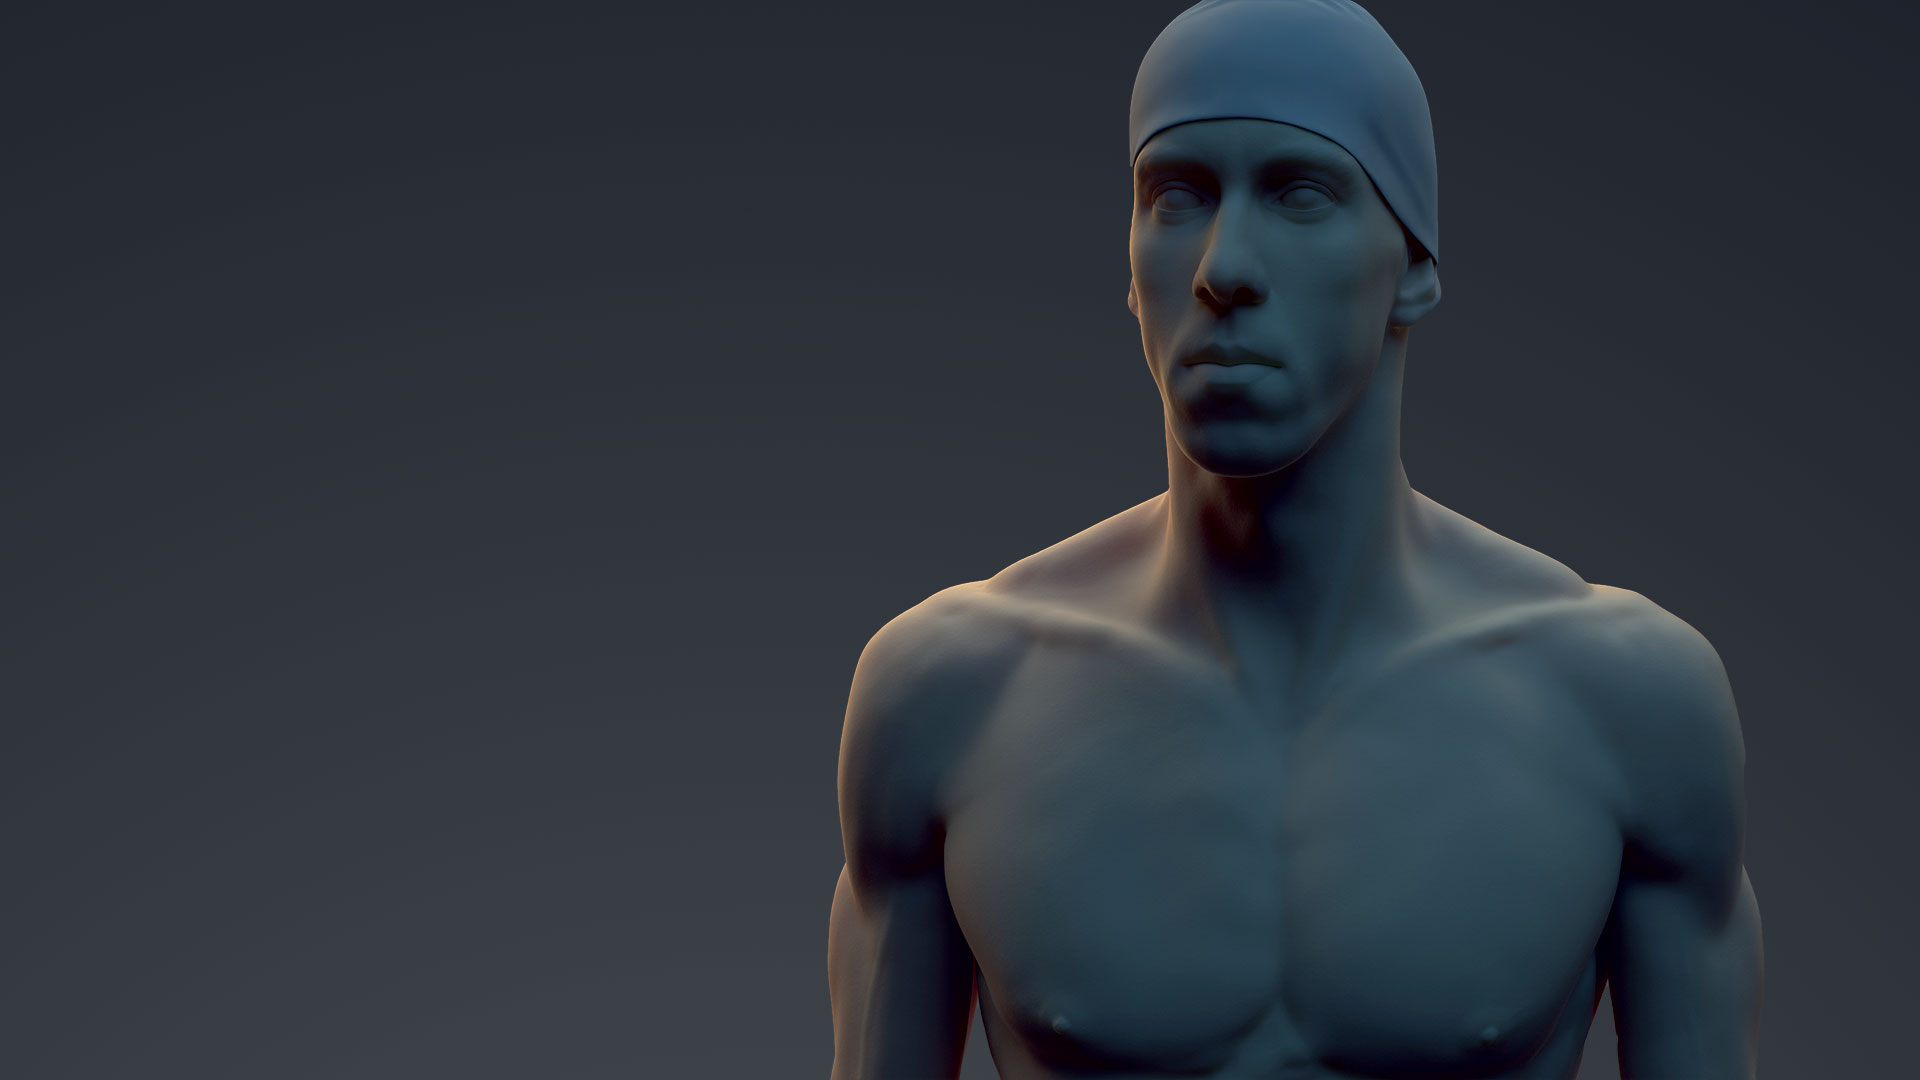 Learn how to sculpt people whose bodies fall outside of the norm